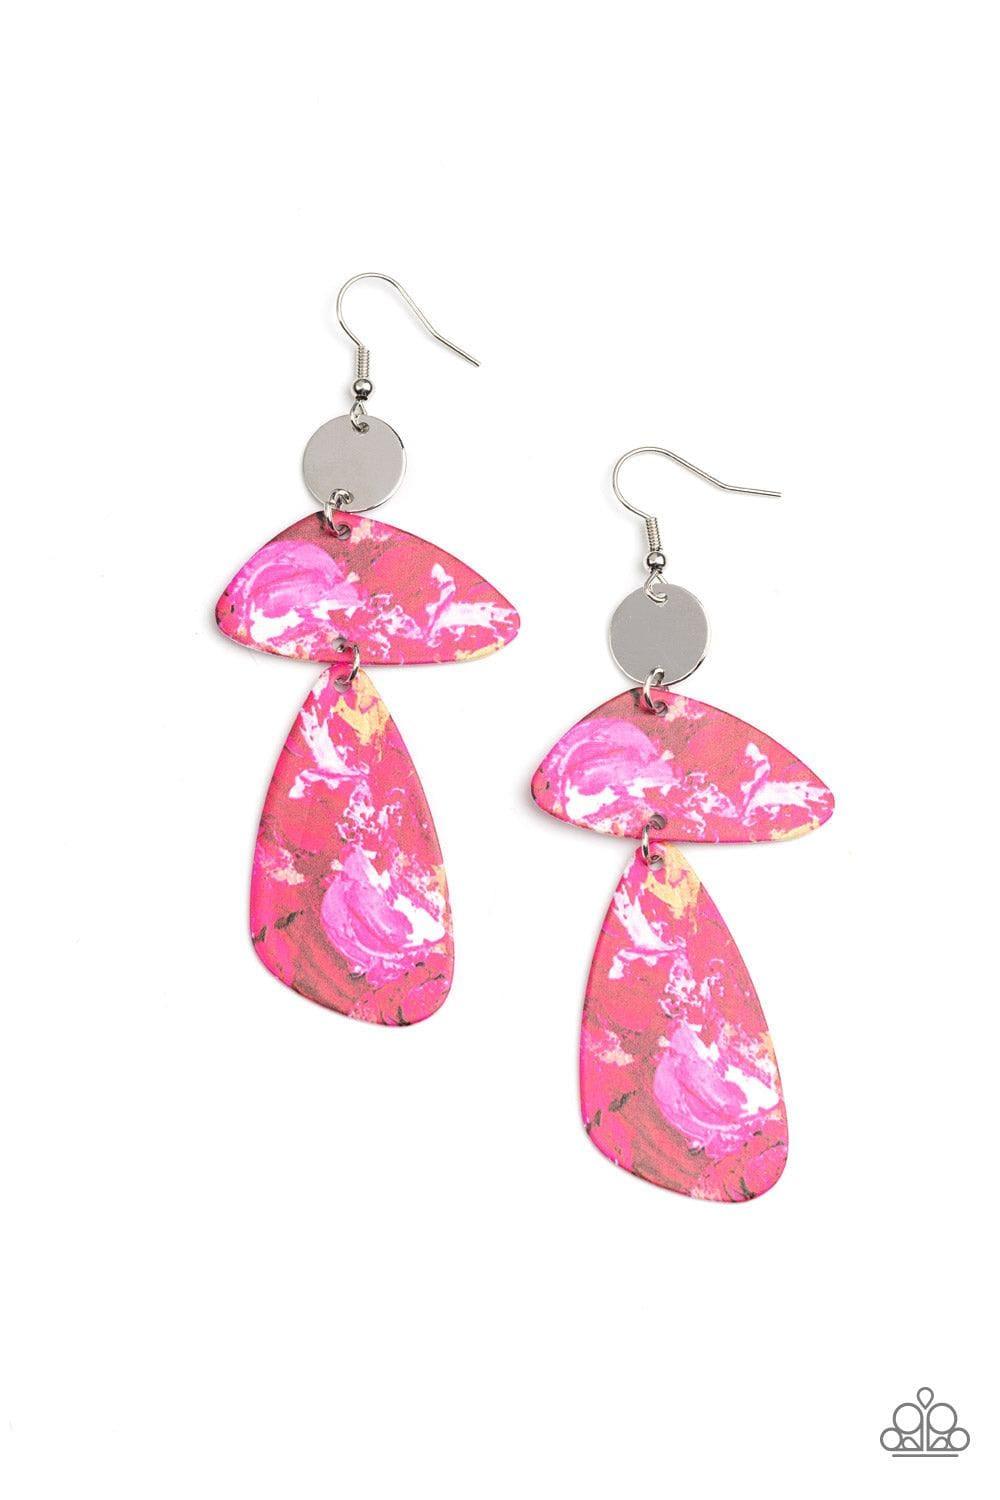 Paparazzi Accessories - Swatch Me Now - Pink Earrings - Bling by JessieK